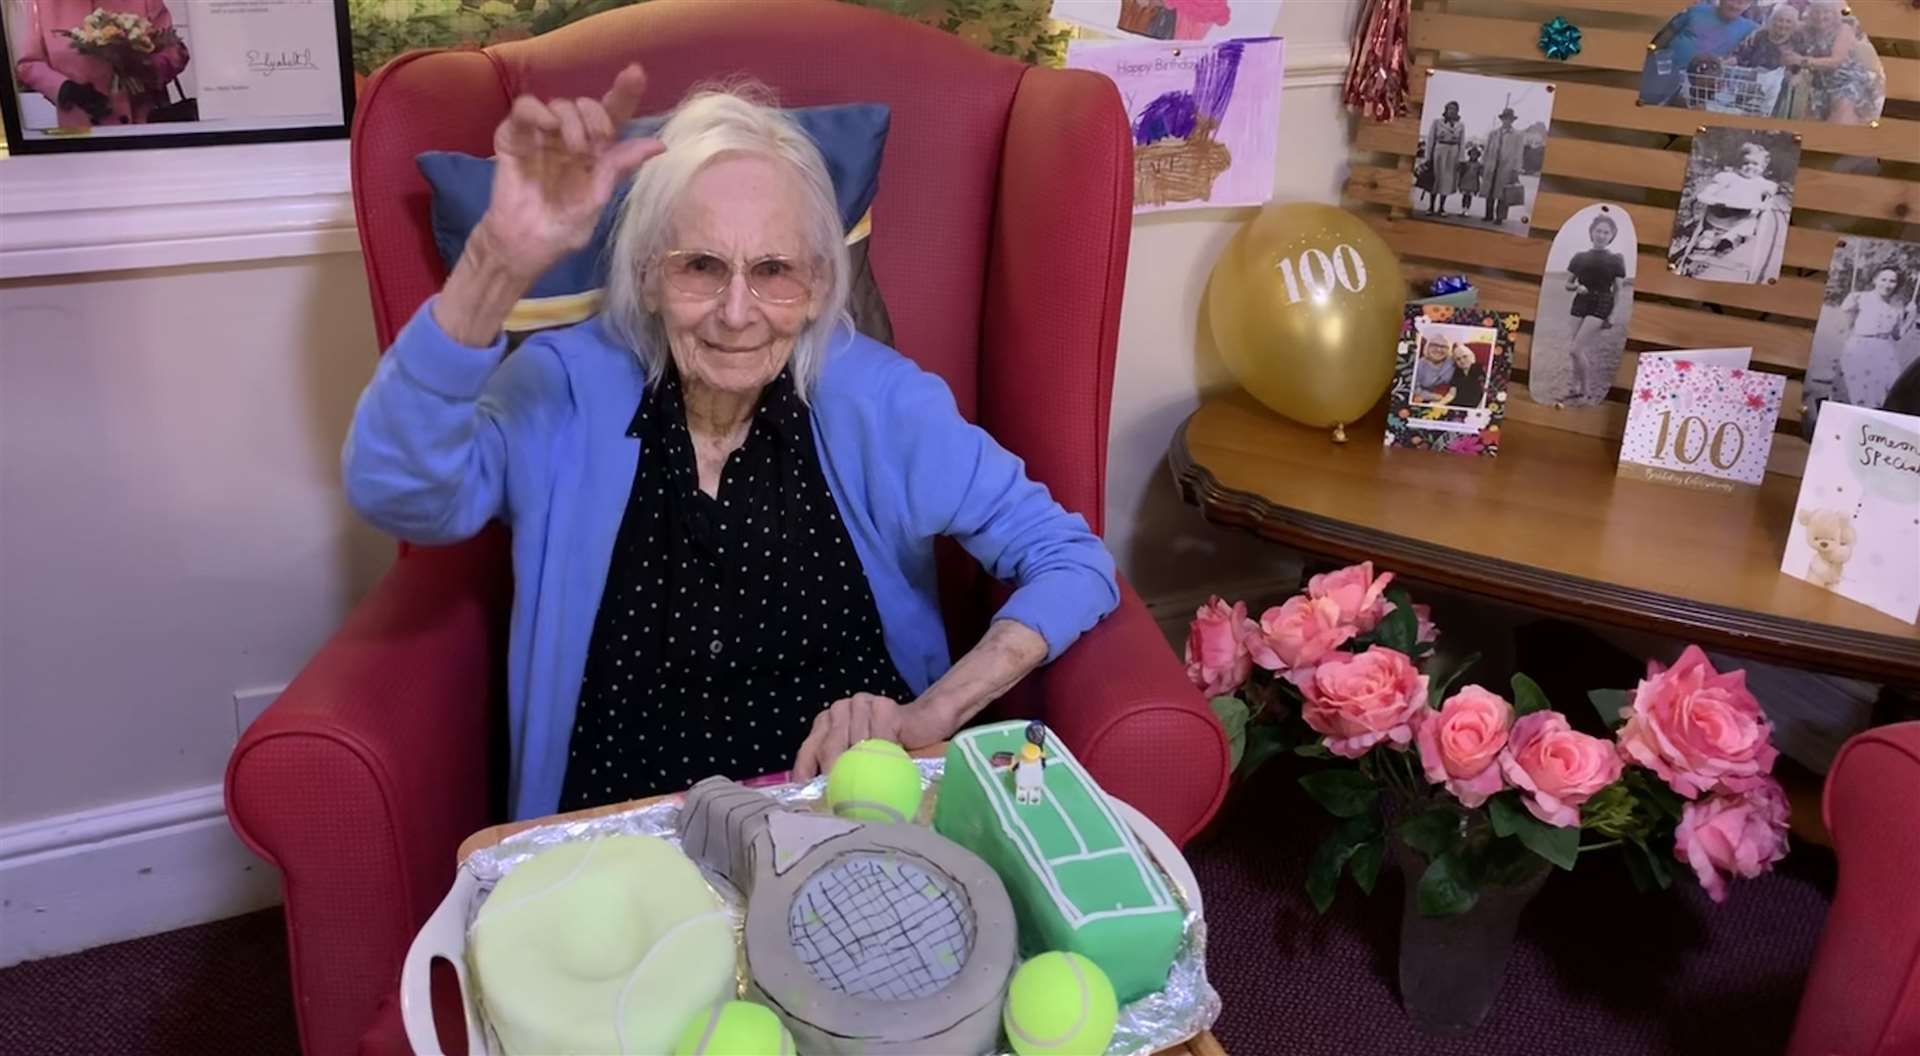 Betty Searls celebrated her 100th birthday at Lulworth care home in Maidstone